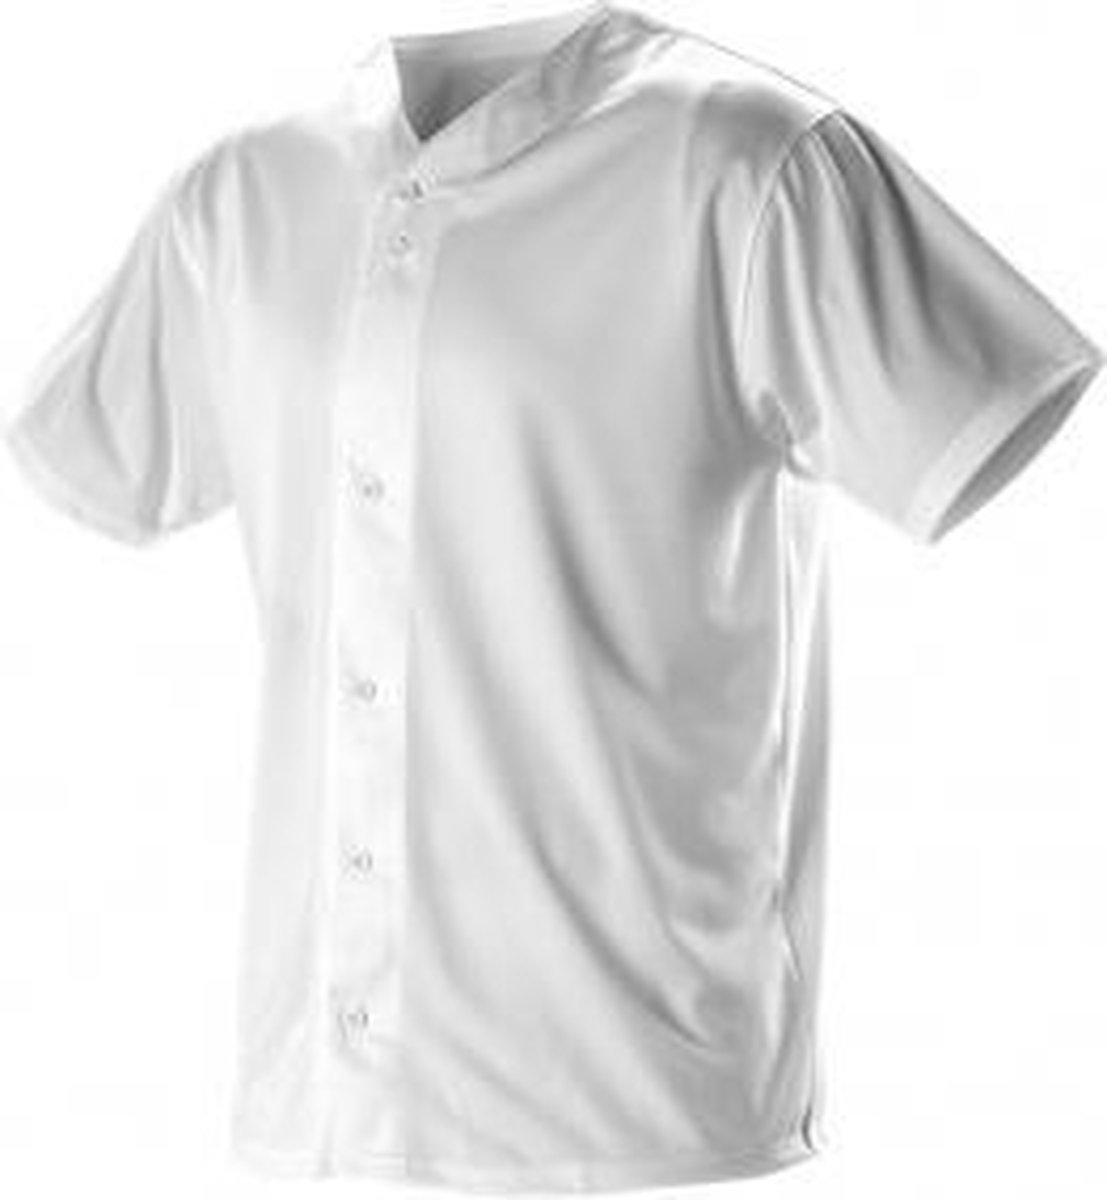 Alleson Athletic Full Button Lightweight Baseball Jersey - White - S